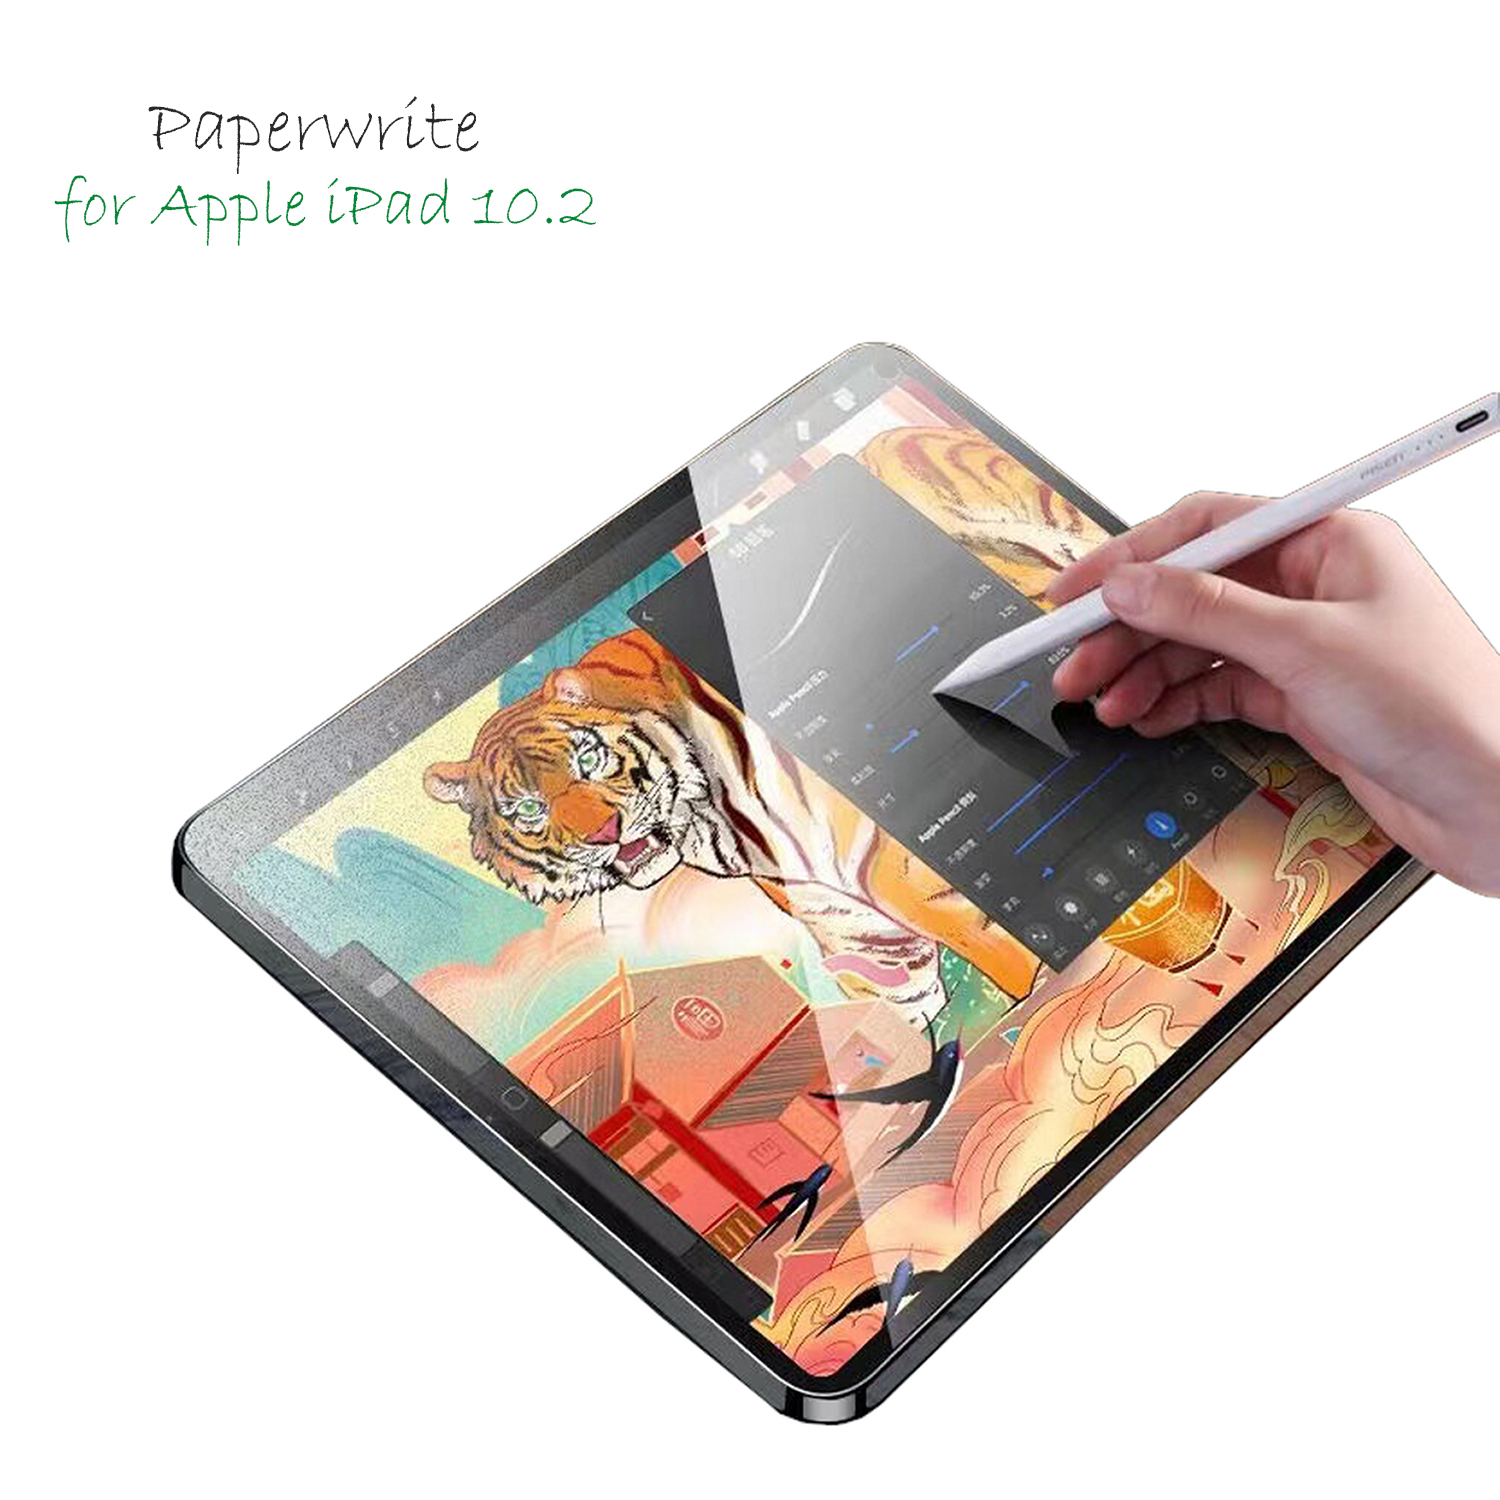 The Paperwrite matte iPad paper screen protector and writing film is the perfect solution to protect your device from scratches.